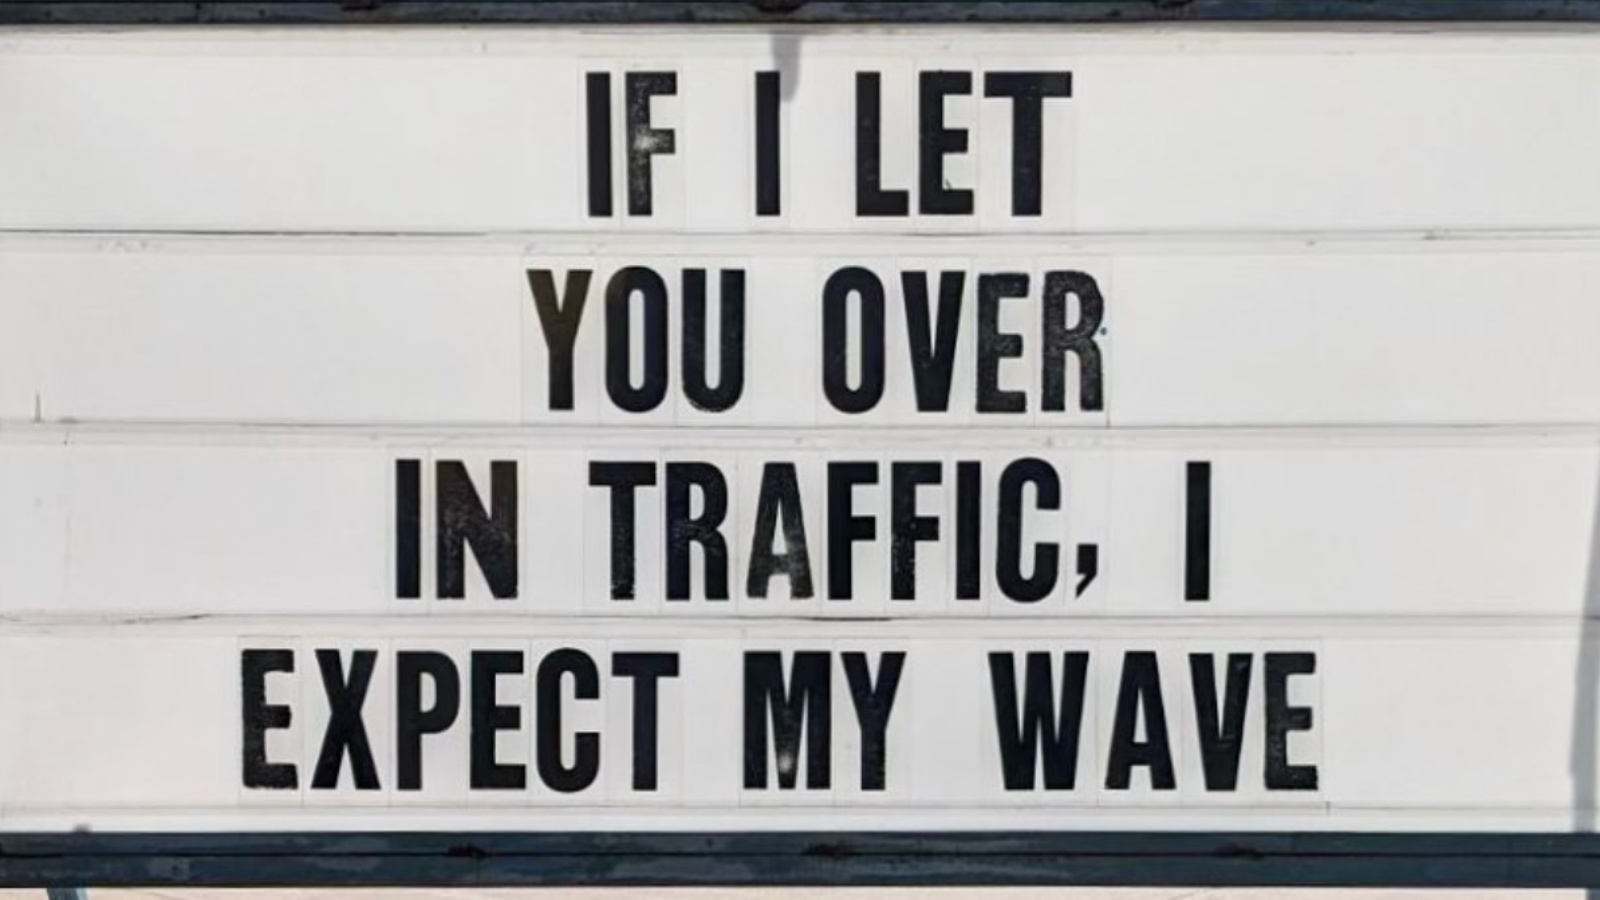 funny meme sign about traffic and waving